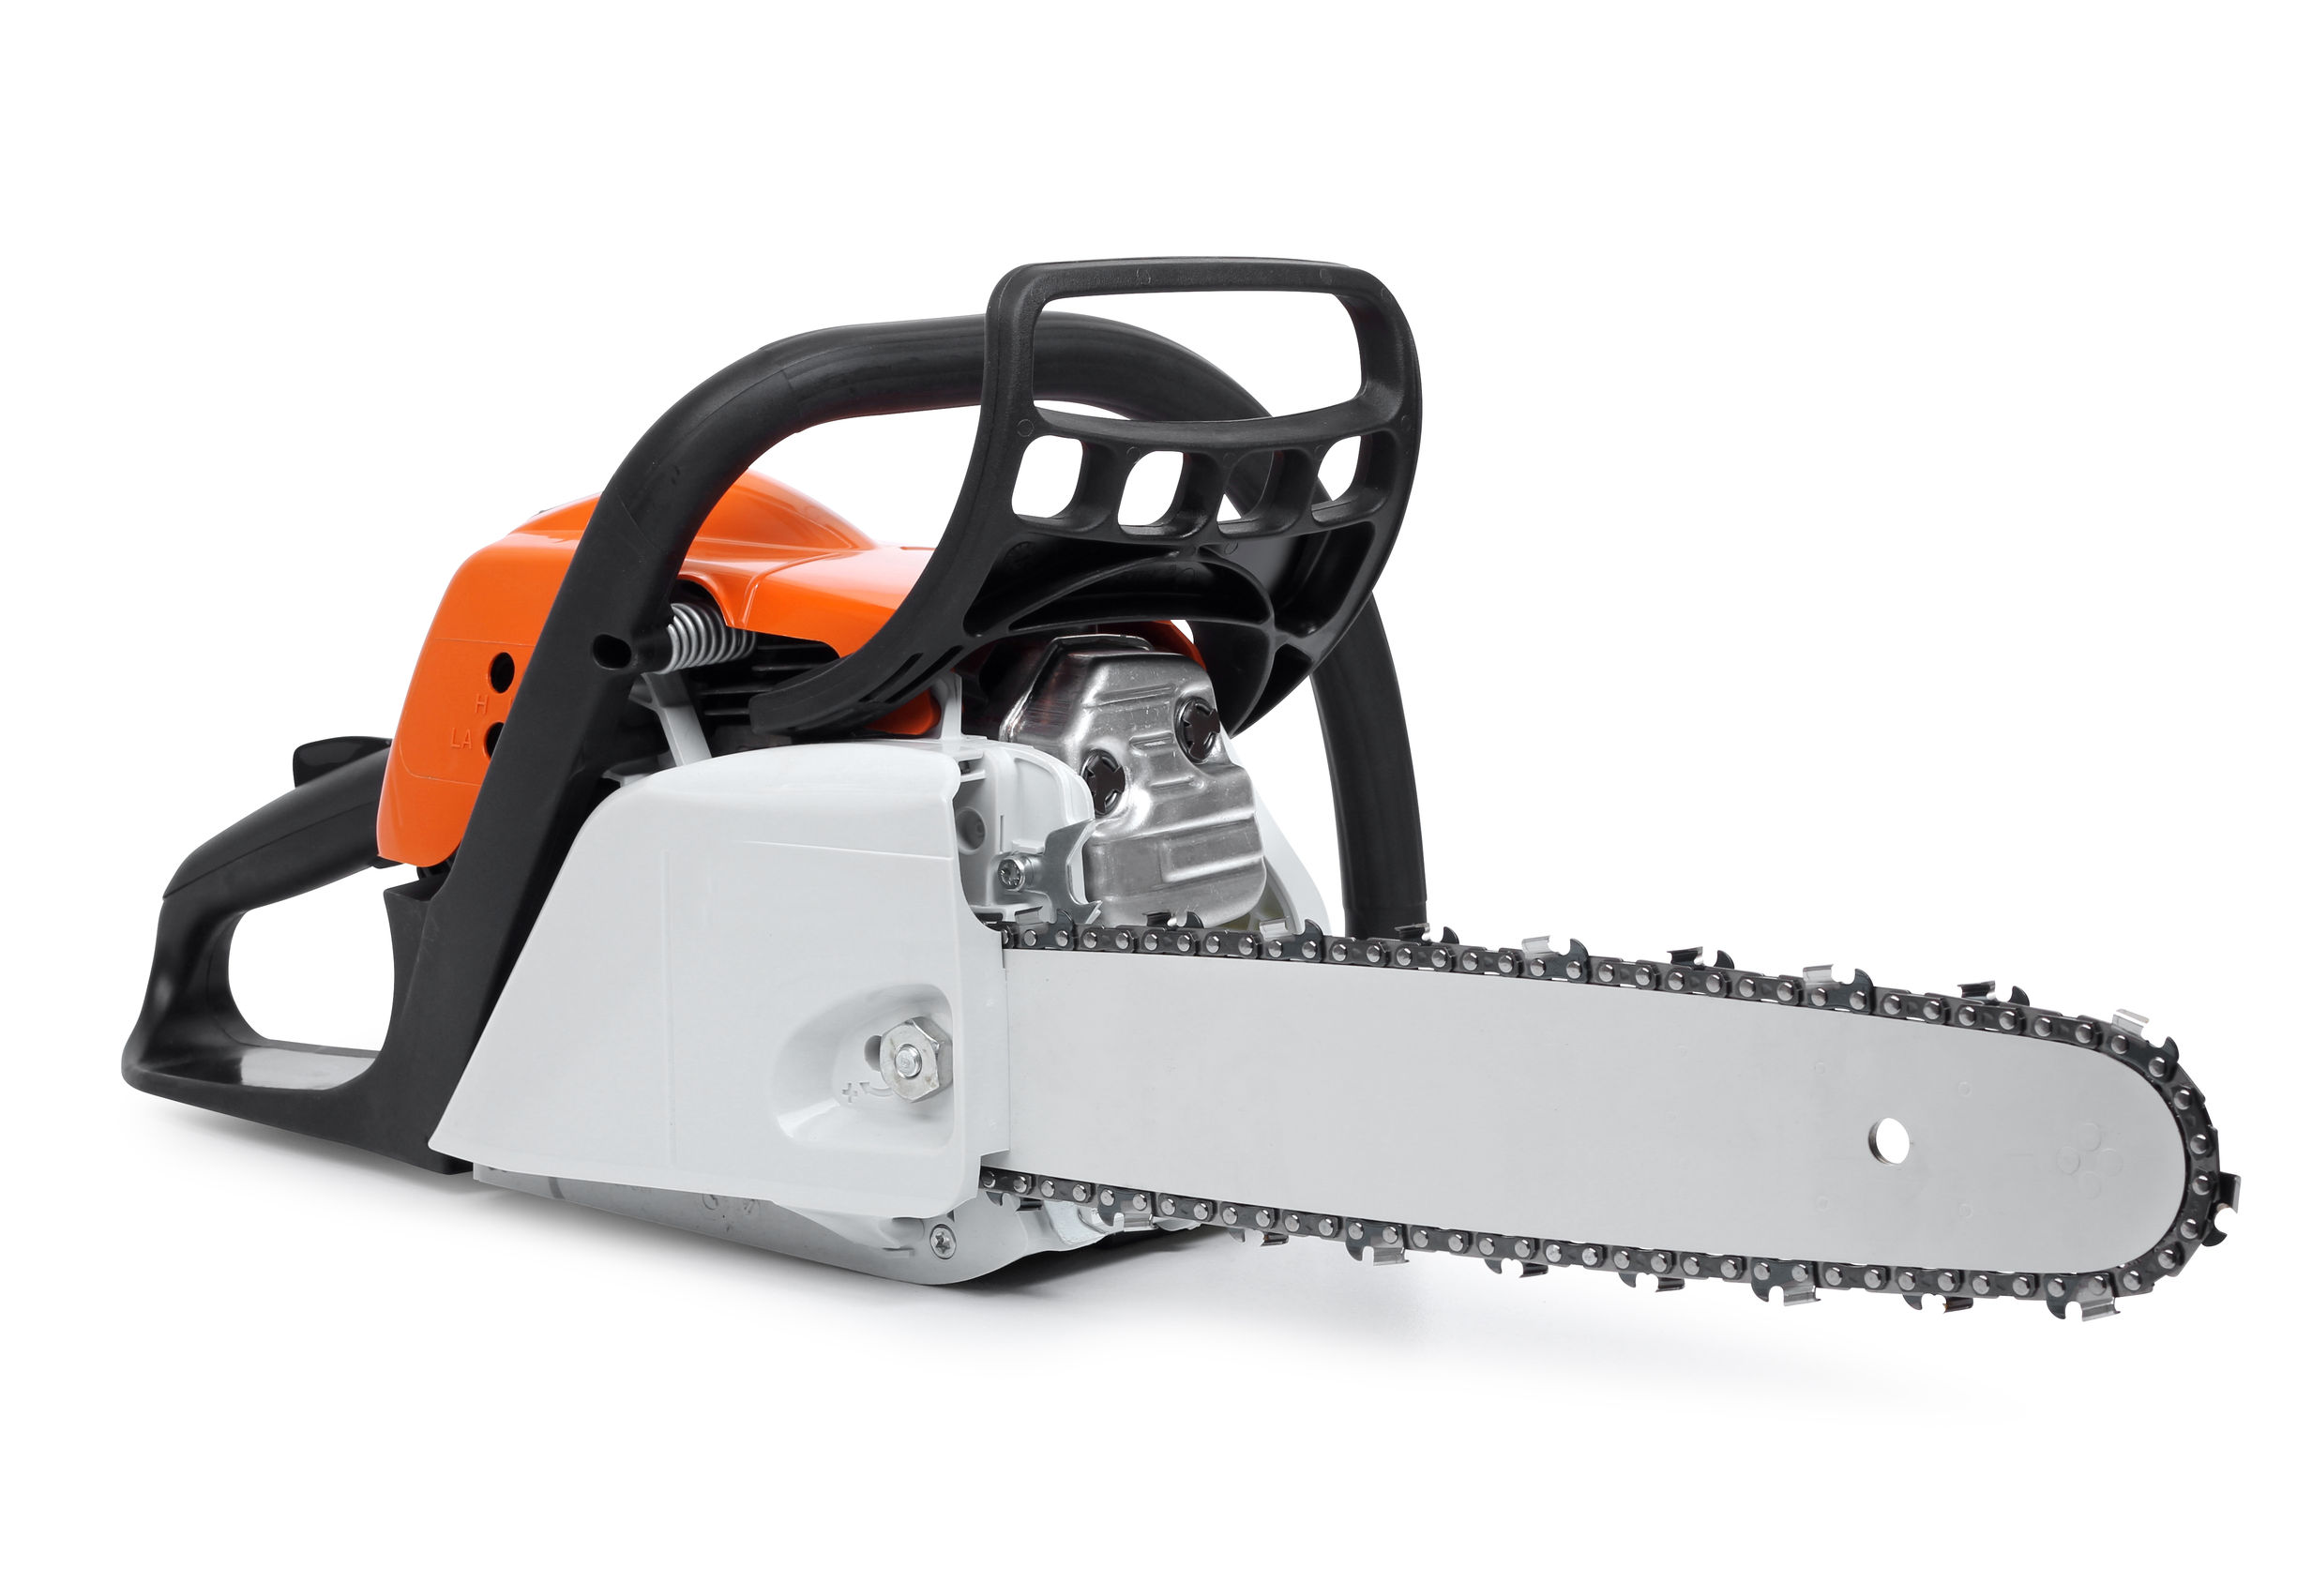 New Yorkers Who Bought These Chainsaws Should Beware